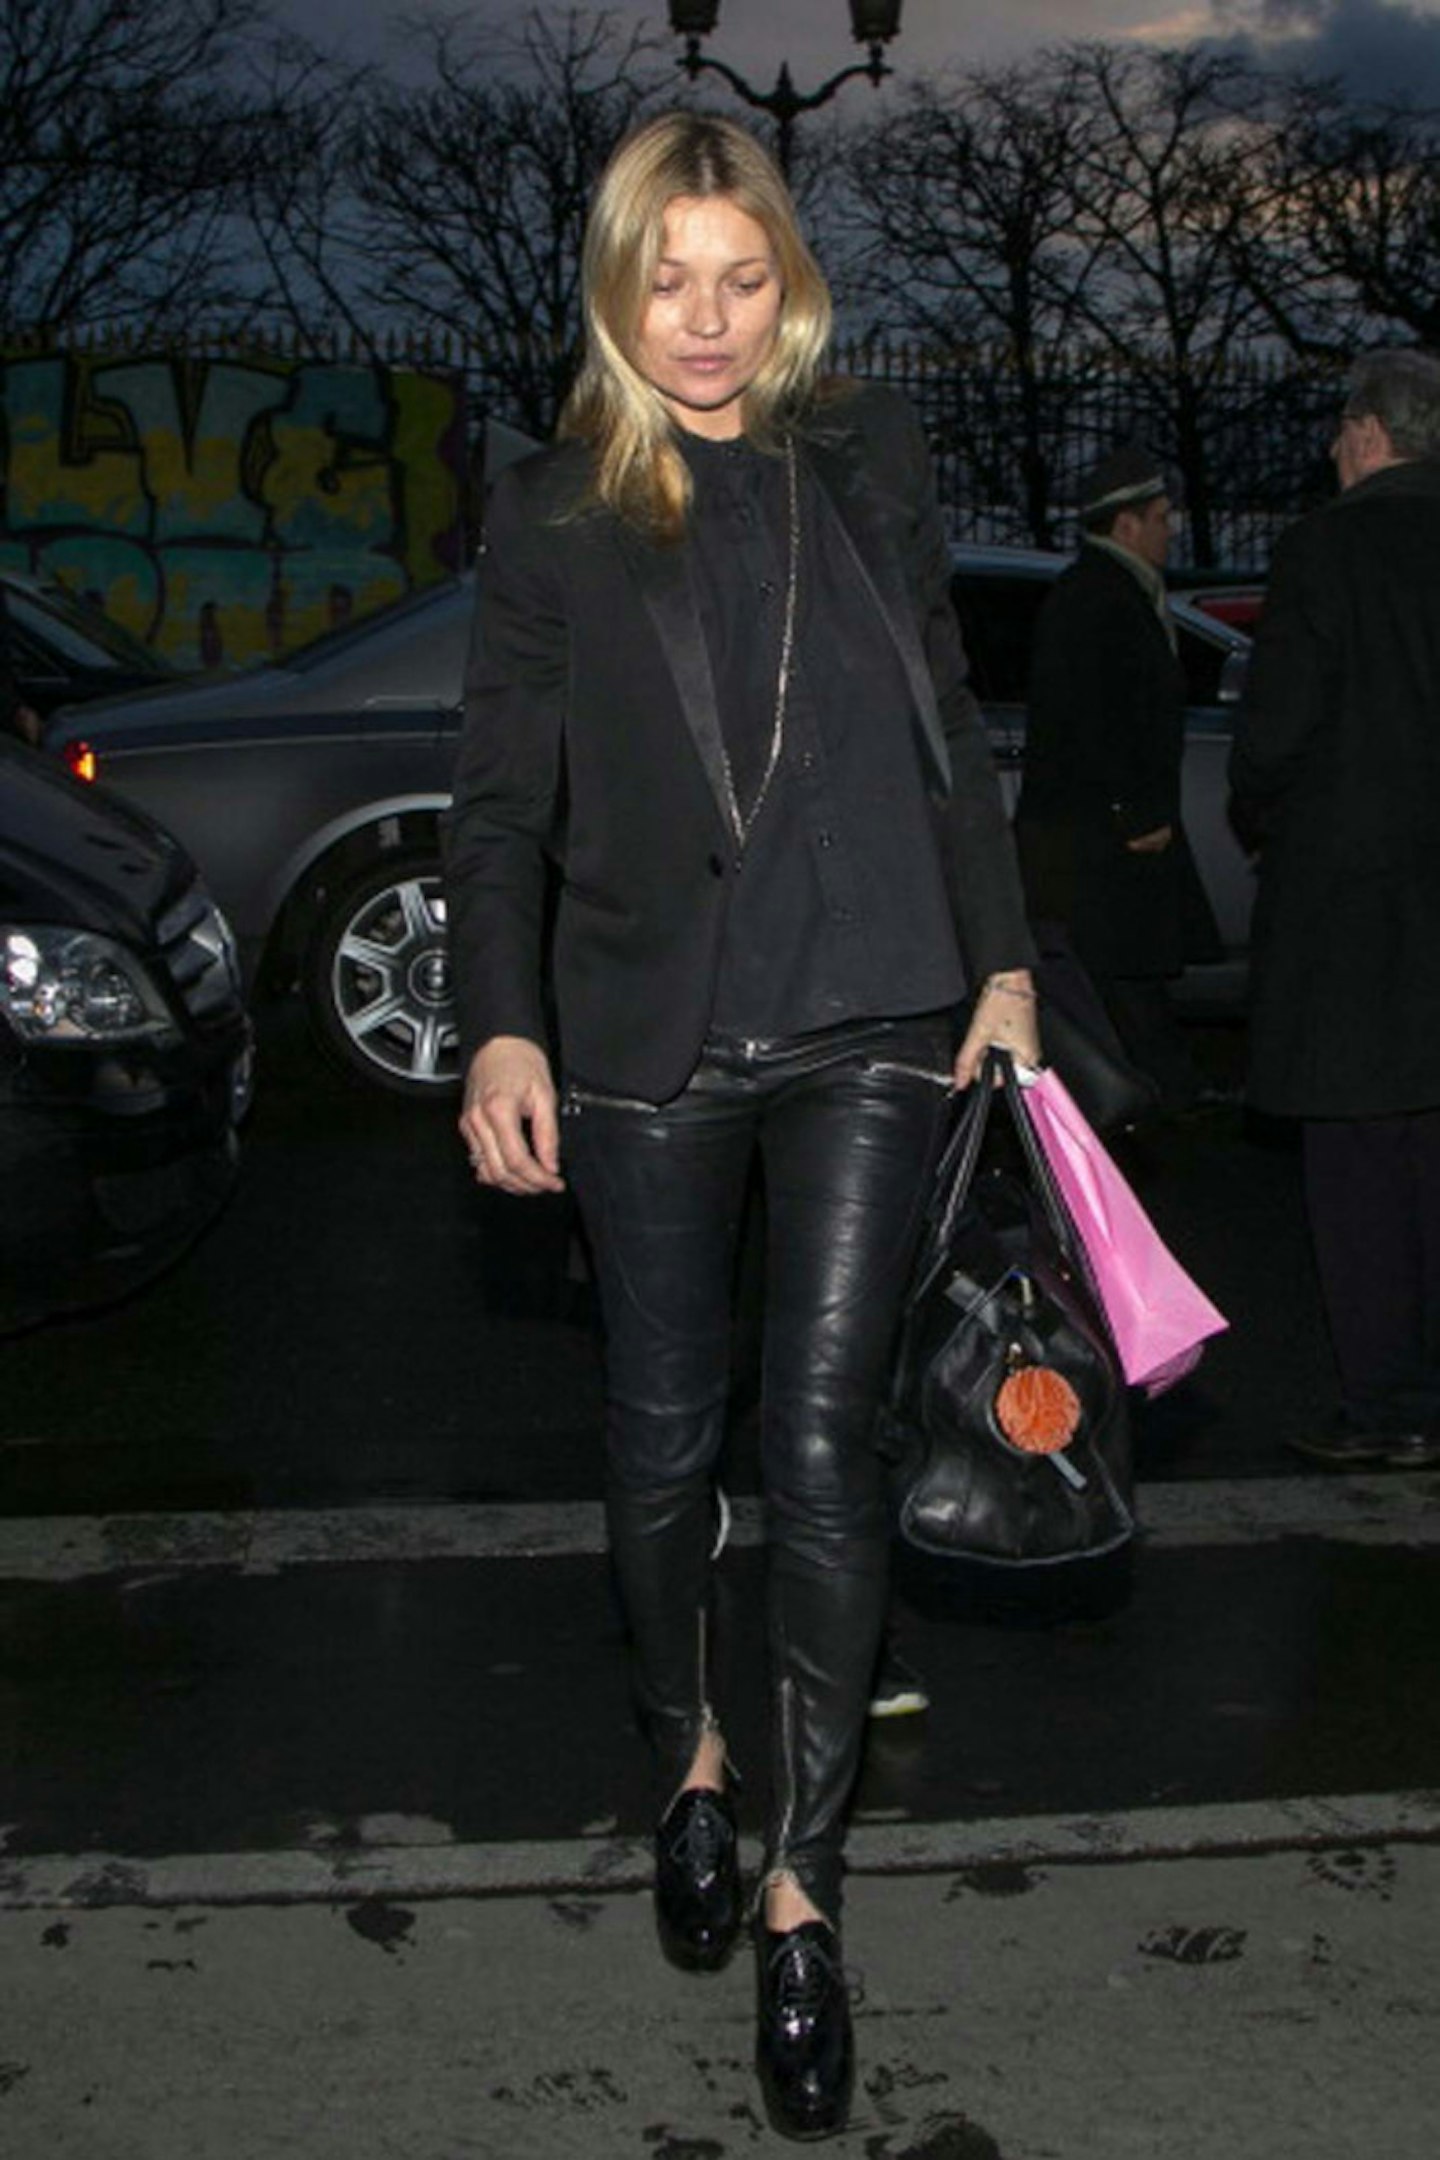 14-Kate Moss arrives at the 'Meurice' hotel on March 3, 2014 in Paris, France on the 3rd March 2014